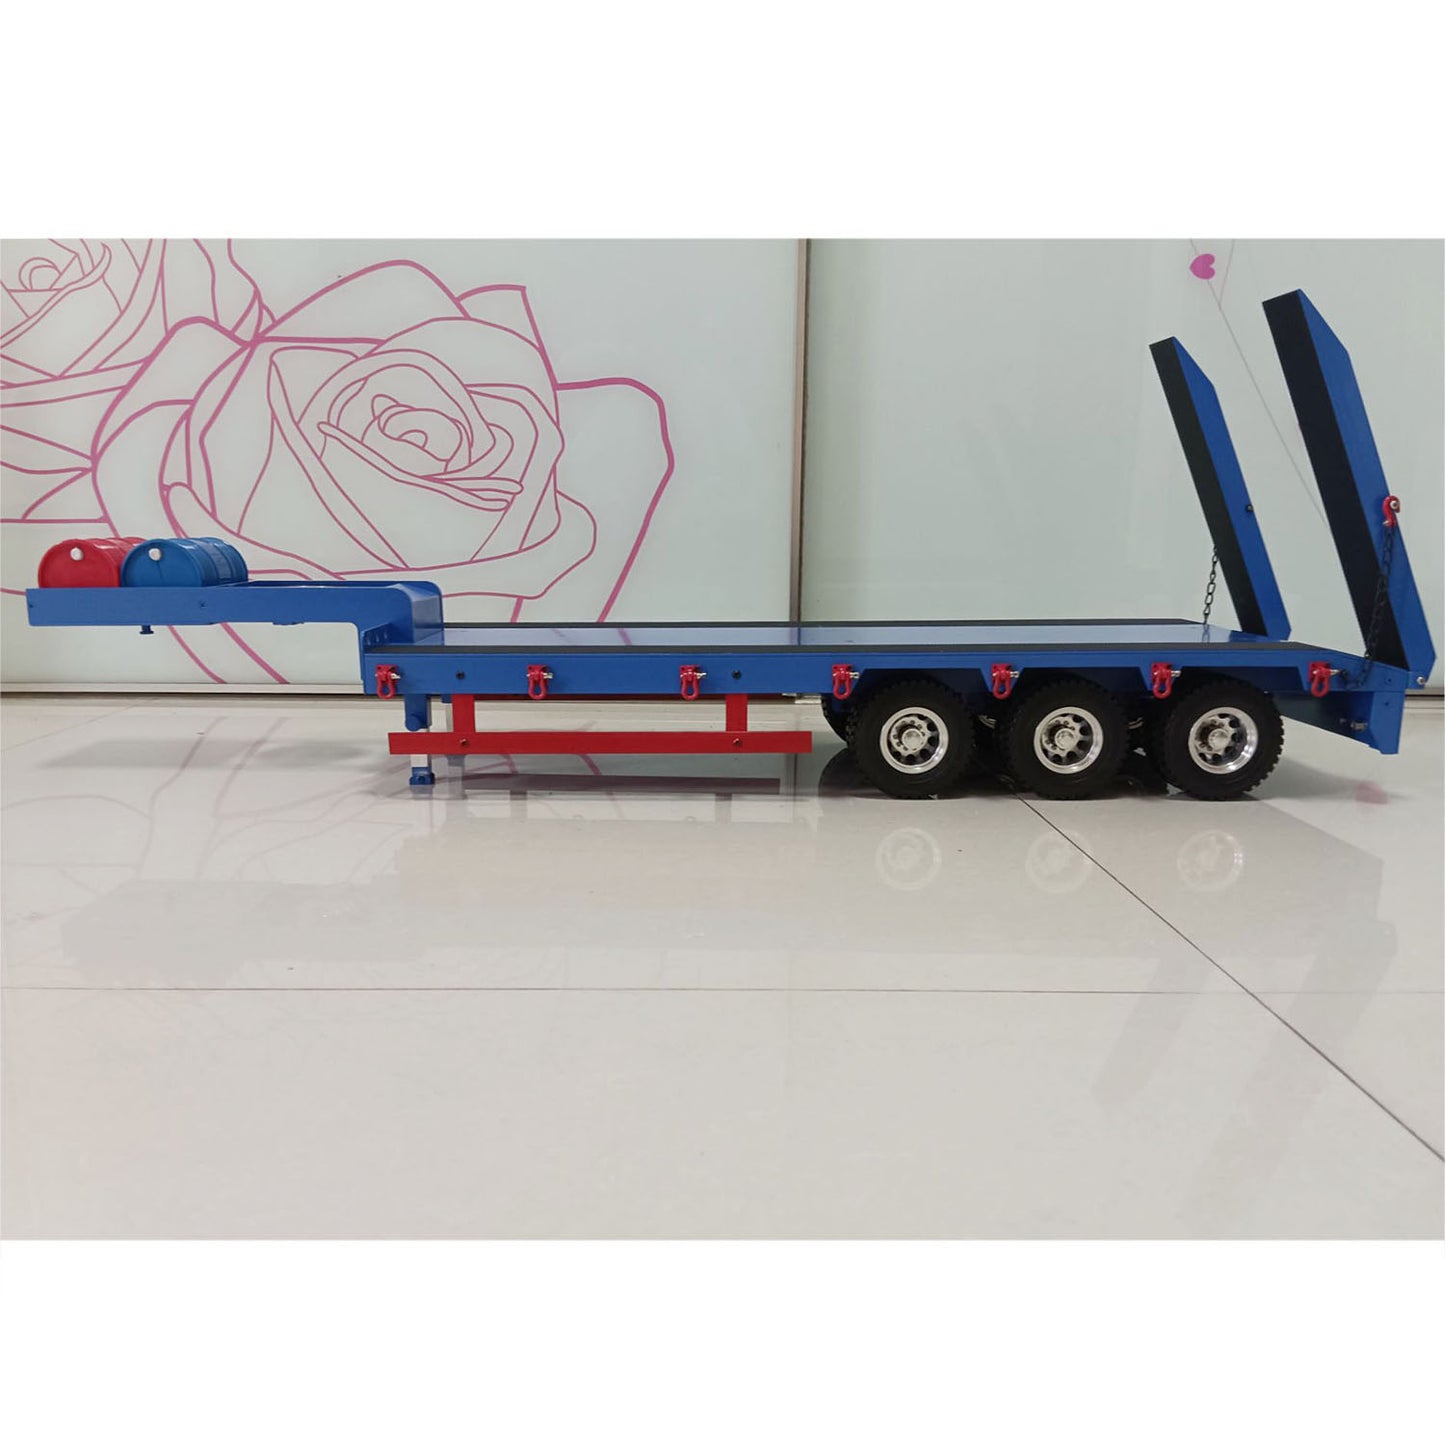 Metal 3 Axles Trailer Semi-trailer for 1/14 RC Tractor Truck Remote Control Cars Simulation Hobby Model DIY Parts